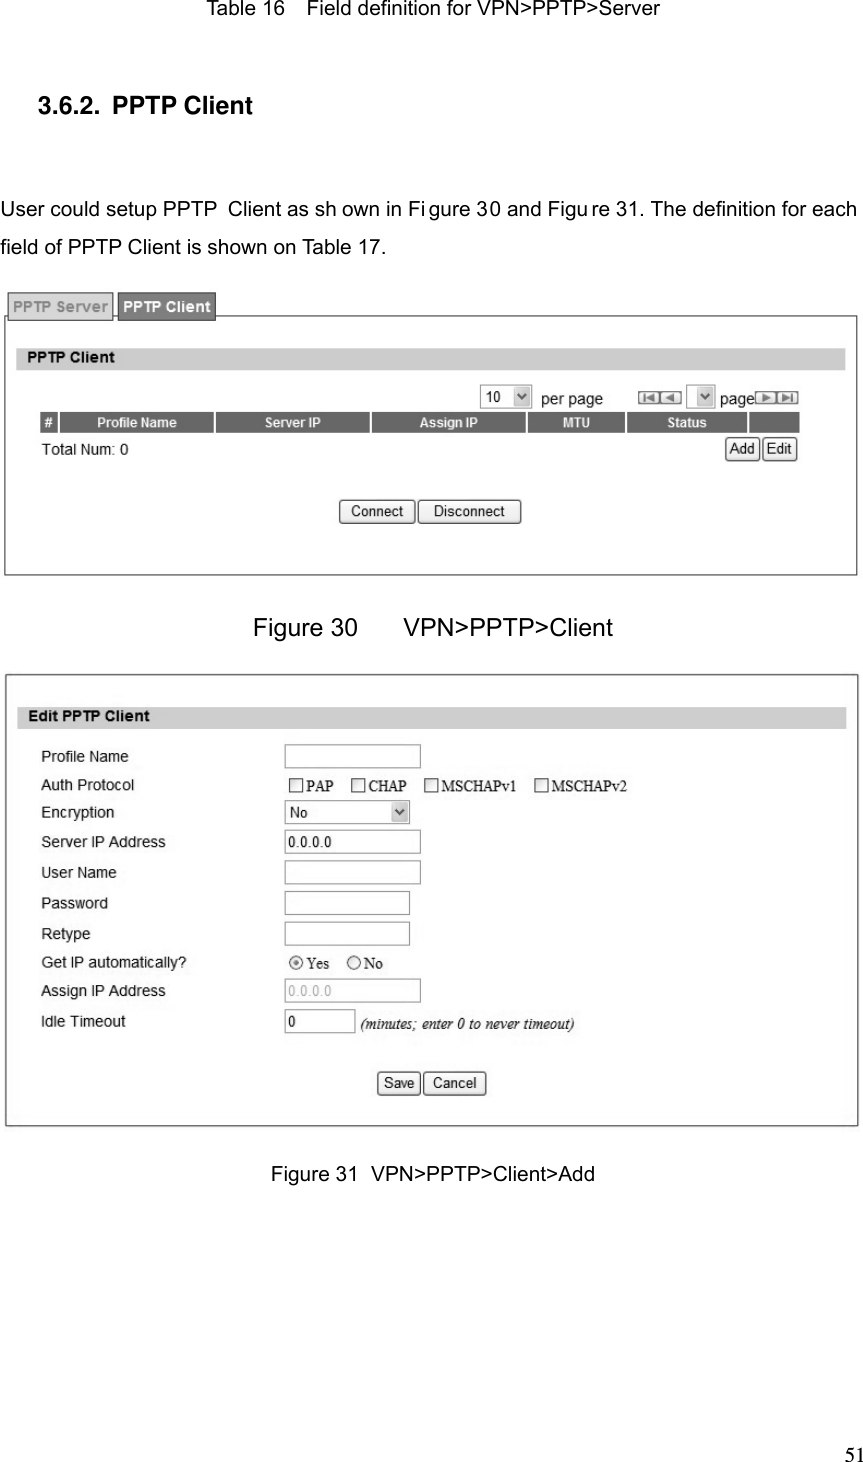  51Table 16  Field definition for VPN&gt;PPTP&gt;Server 3.6.2. PPTP Client User could setup PPTP  Client as sh own in Fi gure 30 and Figu re 31. The definition for each  field of PPTP Client is shown on Table 17.  Figure 30  VPN&gt;PPTP&gt;Client  Figure 31  VPN&gt;PPTP&gt;Client&gt;Add 